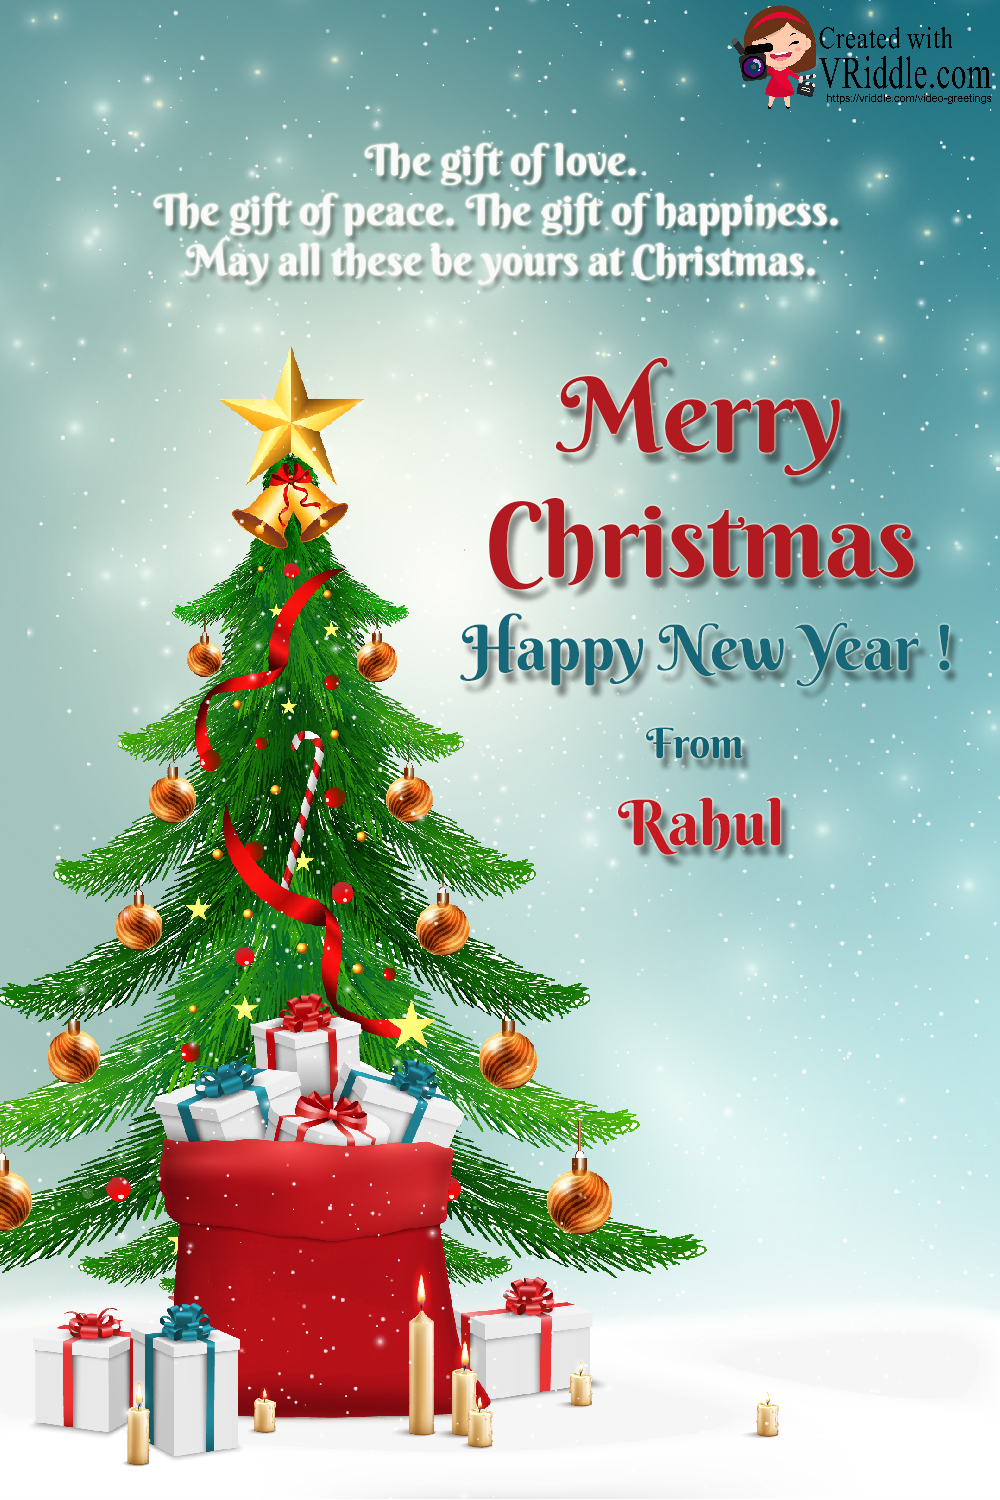 merry christmas and happy new year greetings